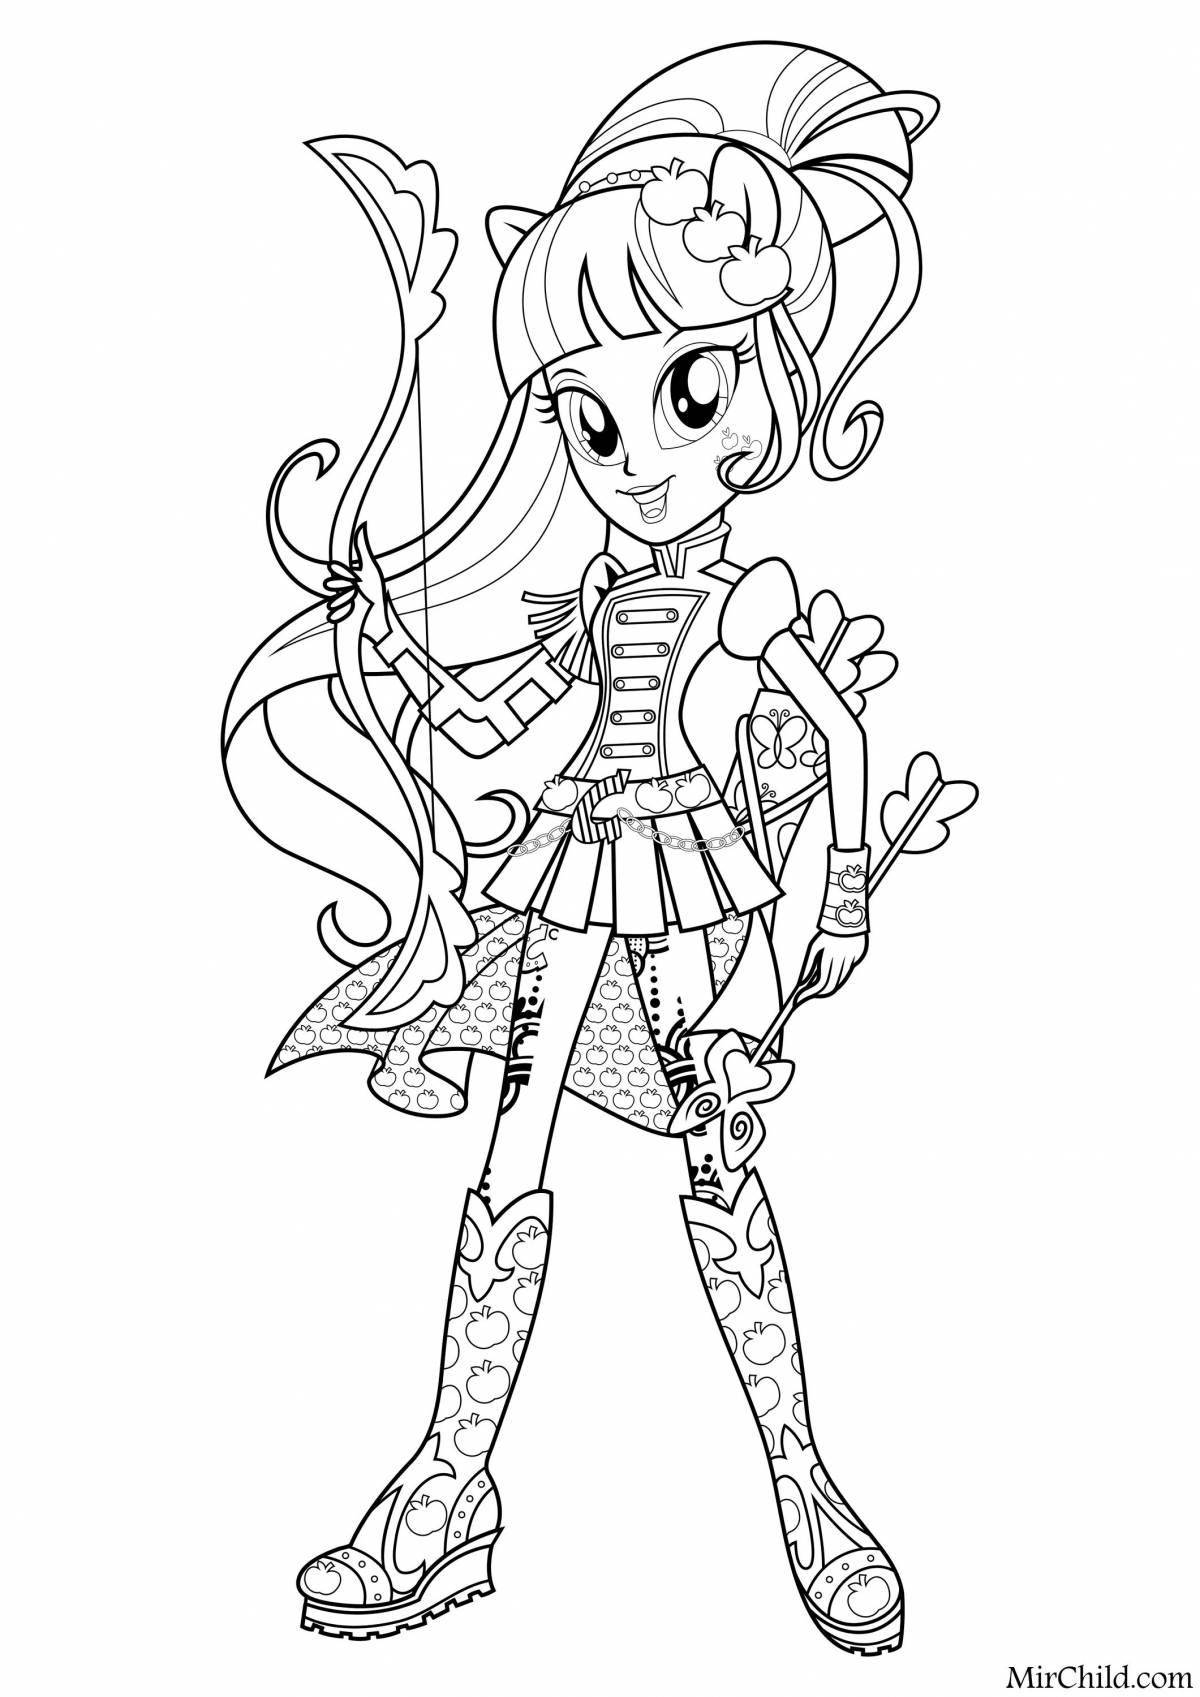 Coloring page gorgeous pony doll